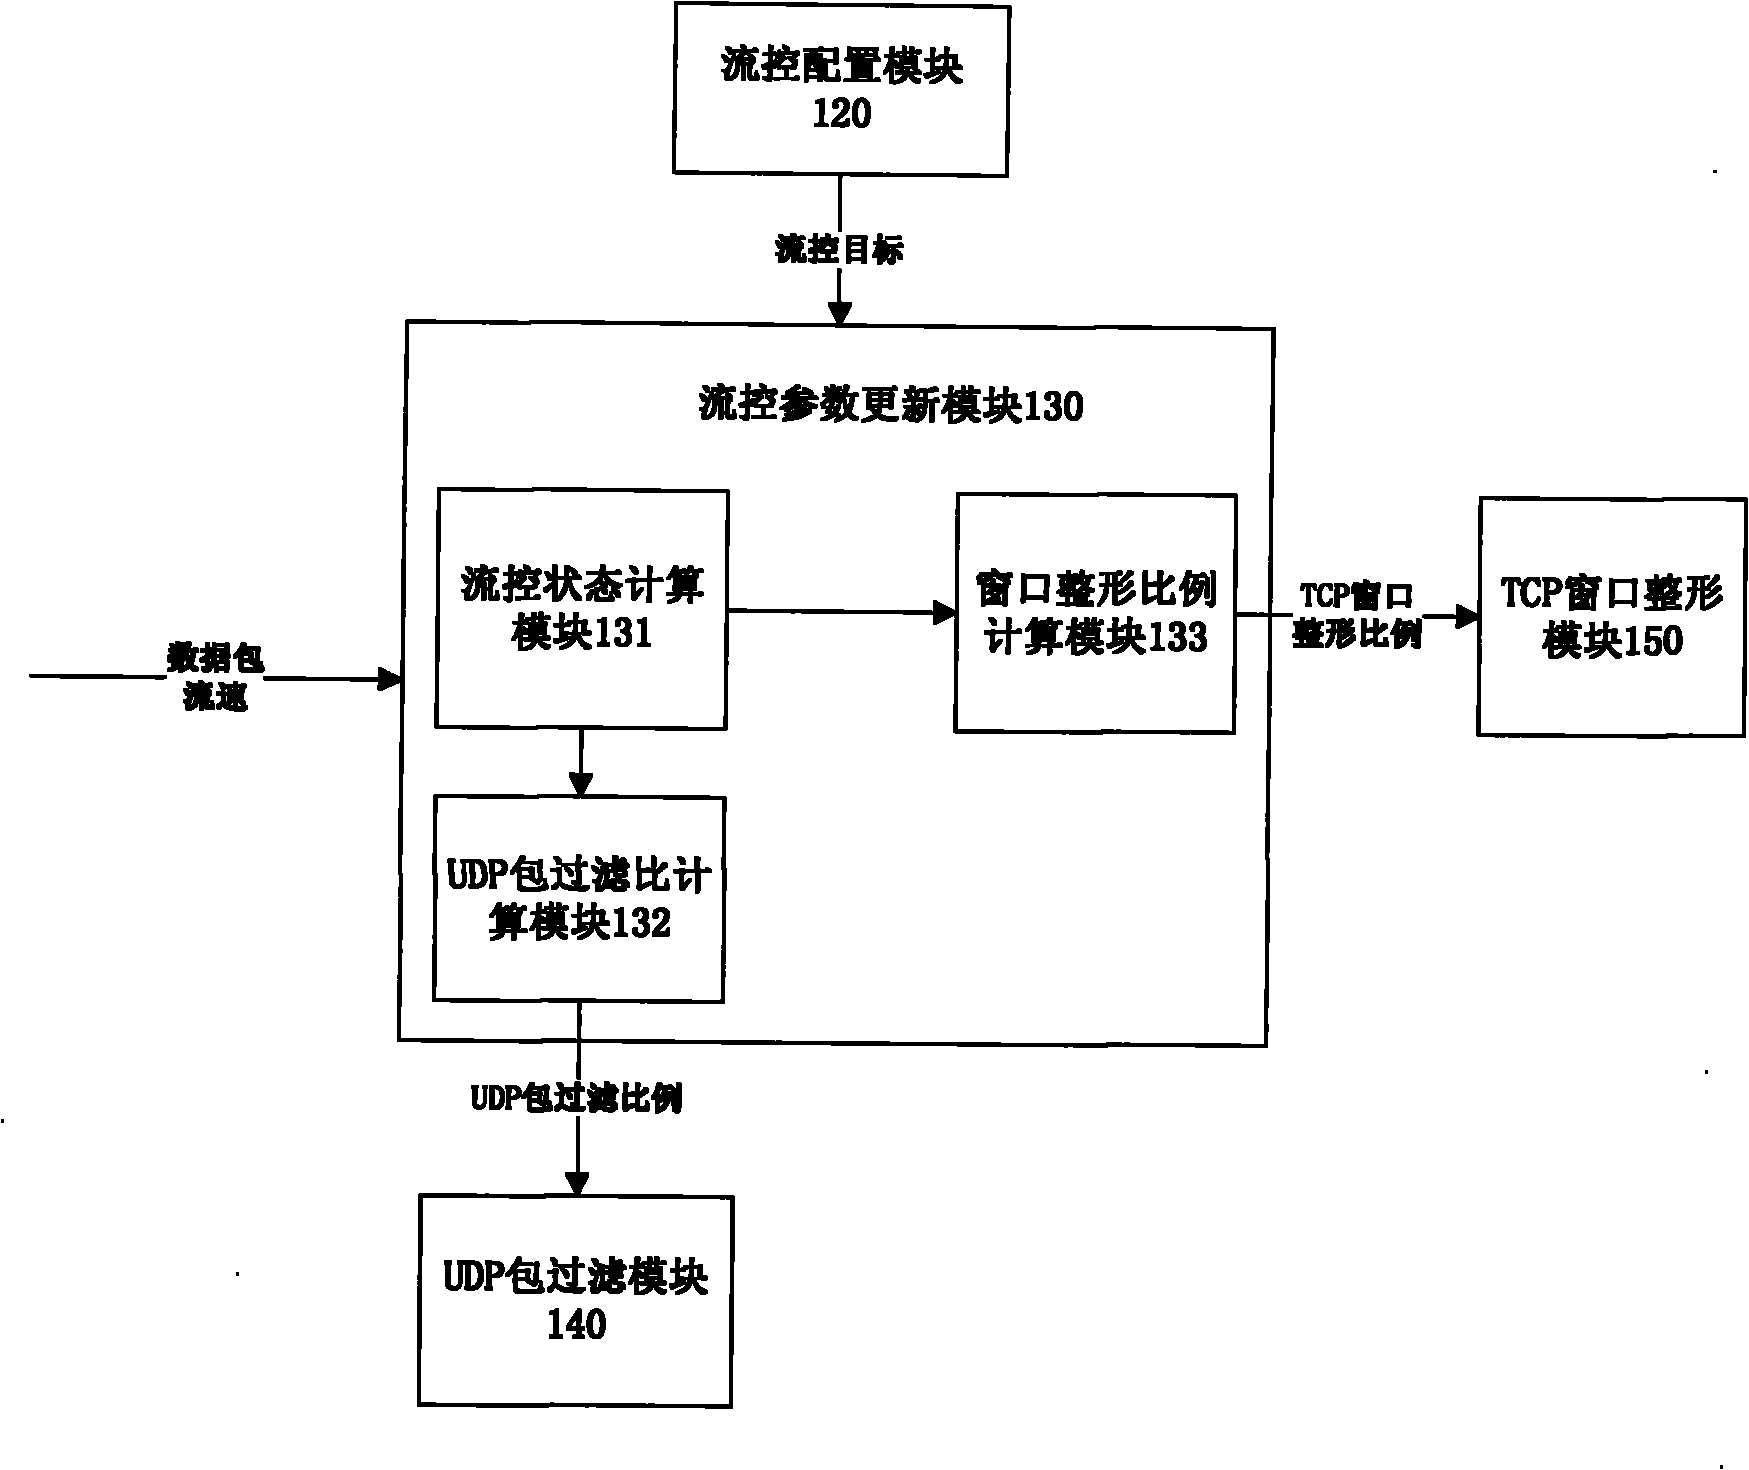 Network flow control system and method